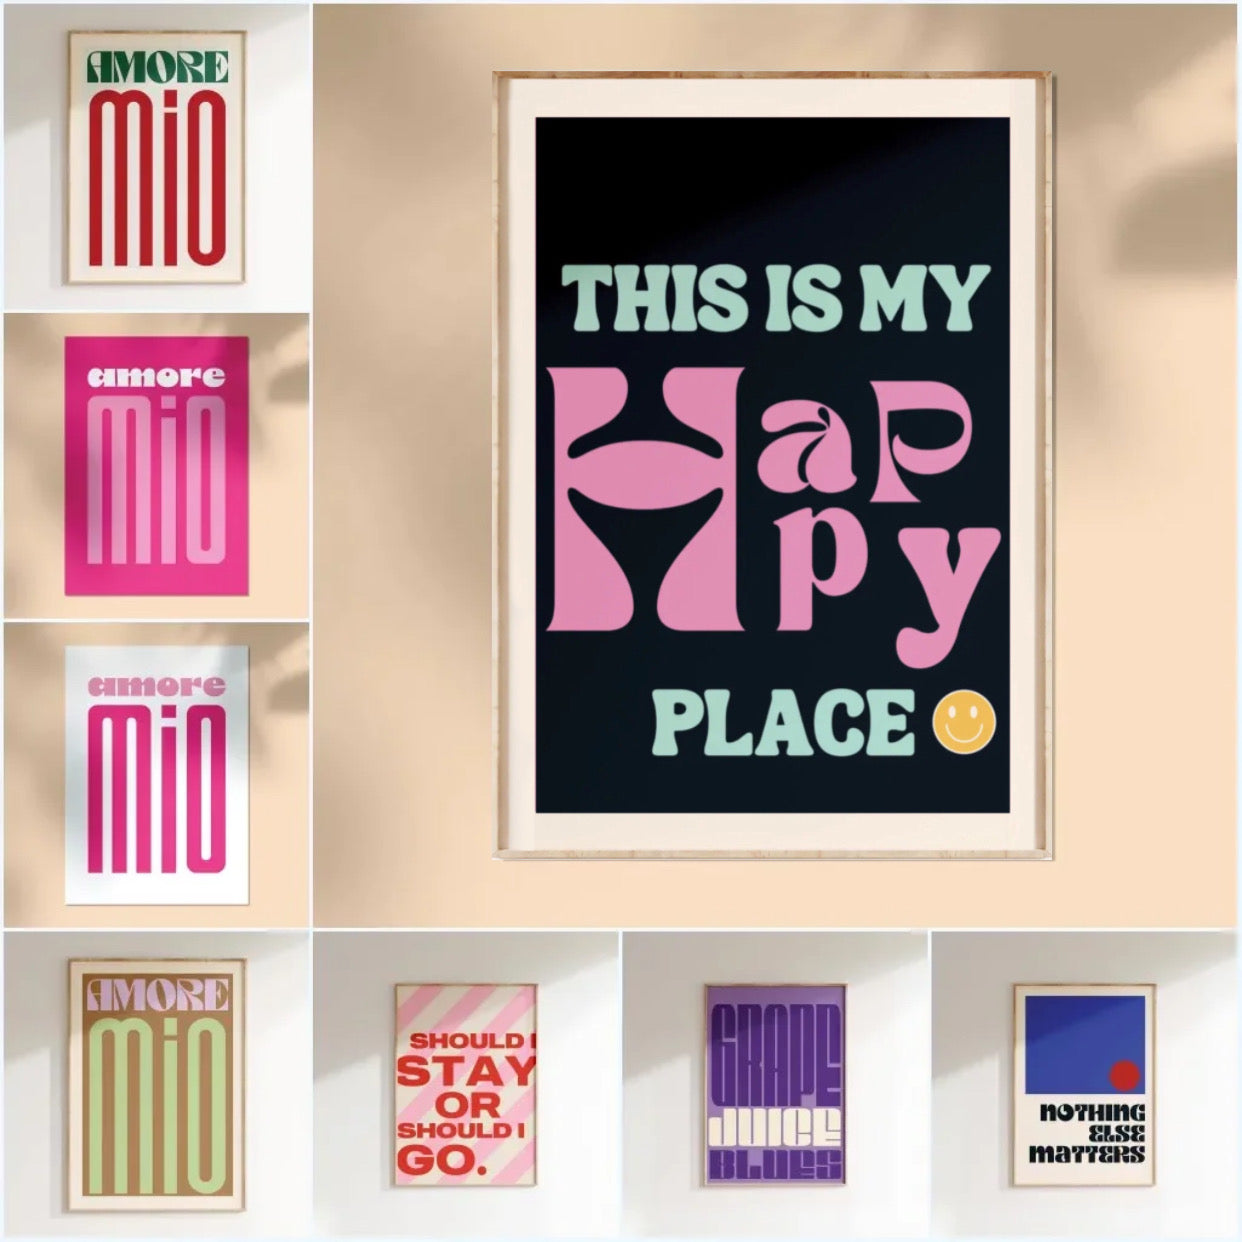 "this is my happy place " poster